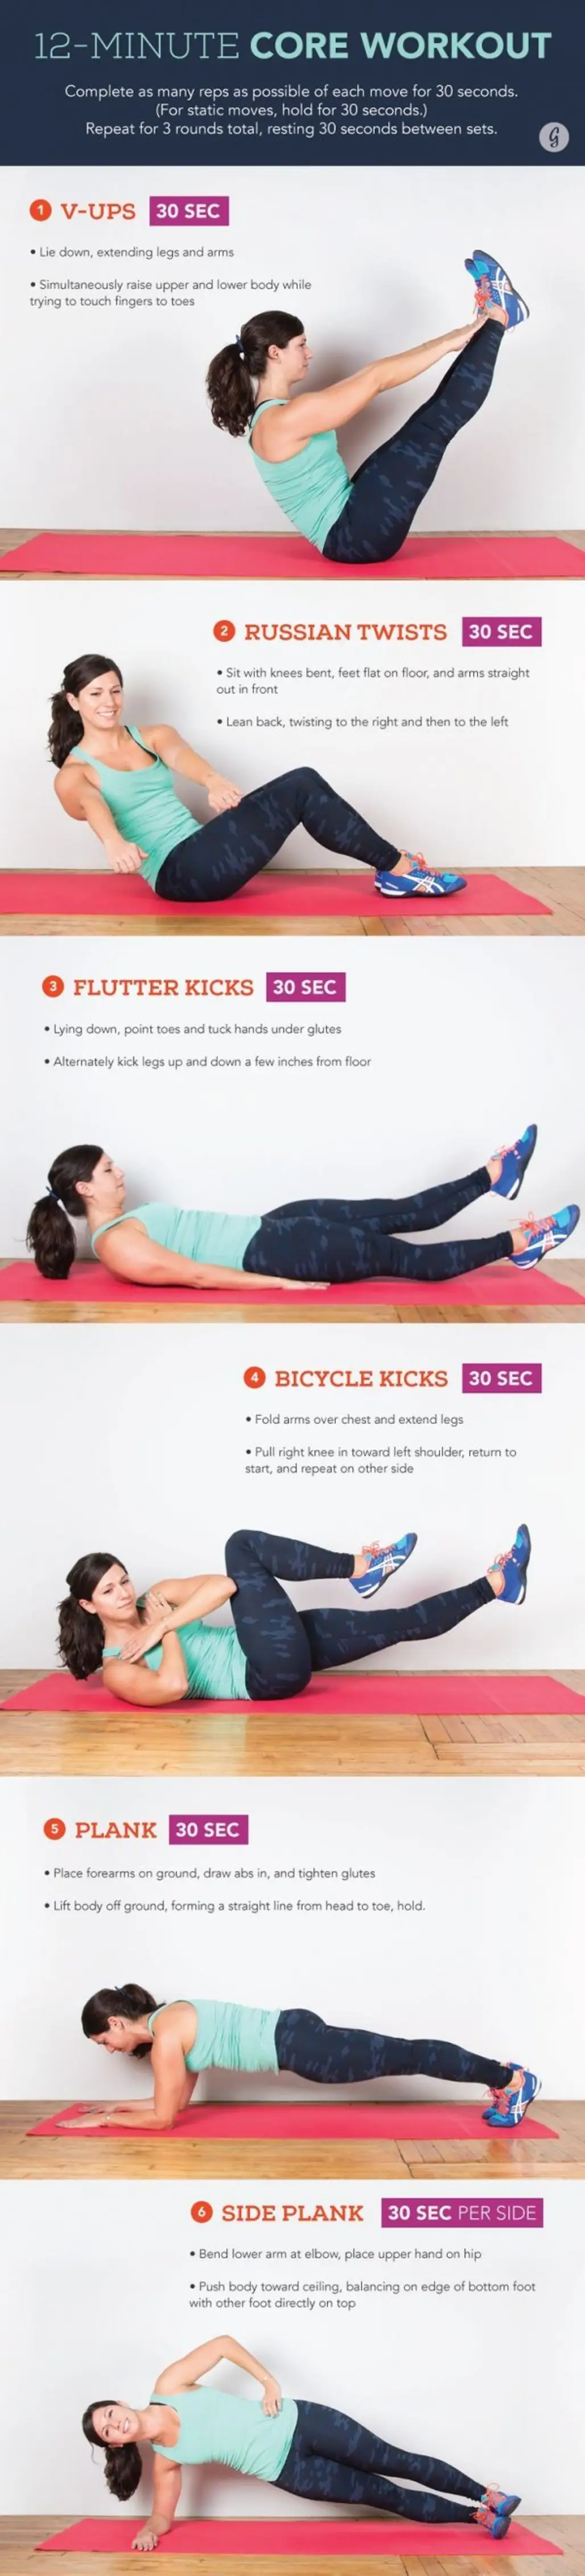 12-Minute Core Workout